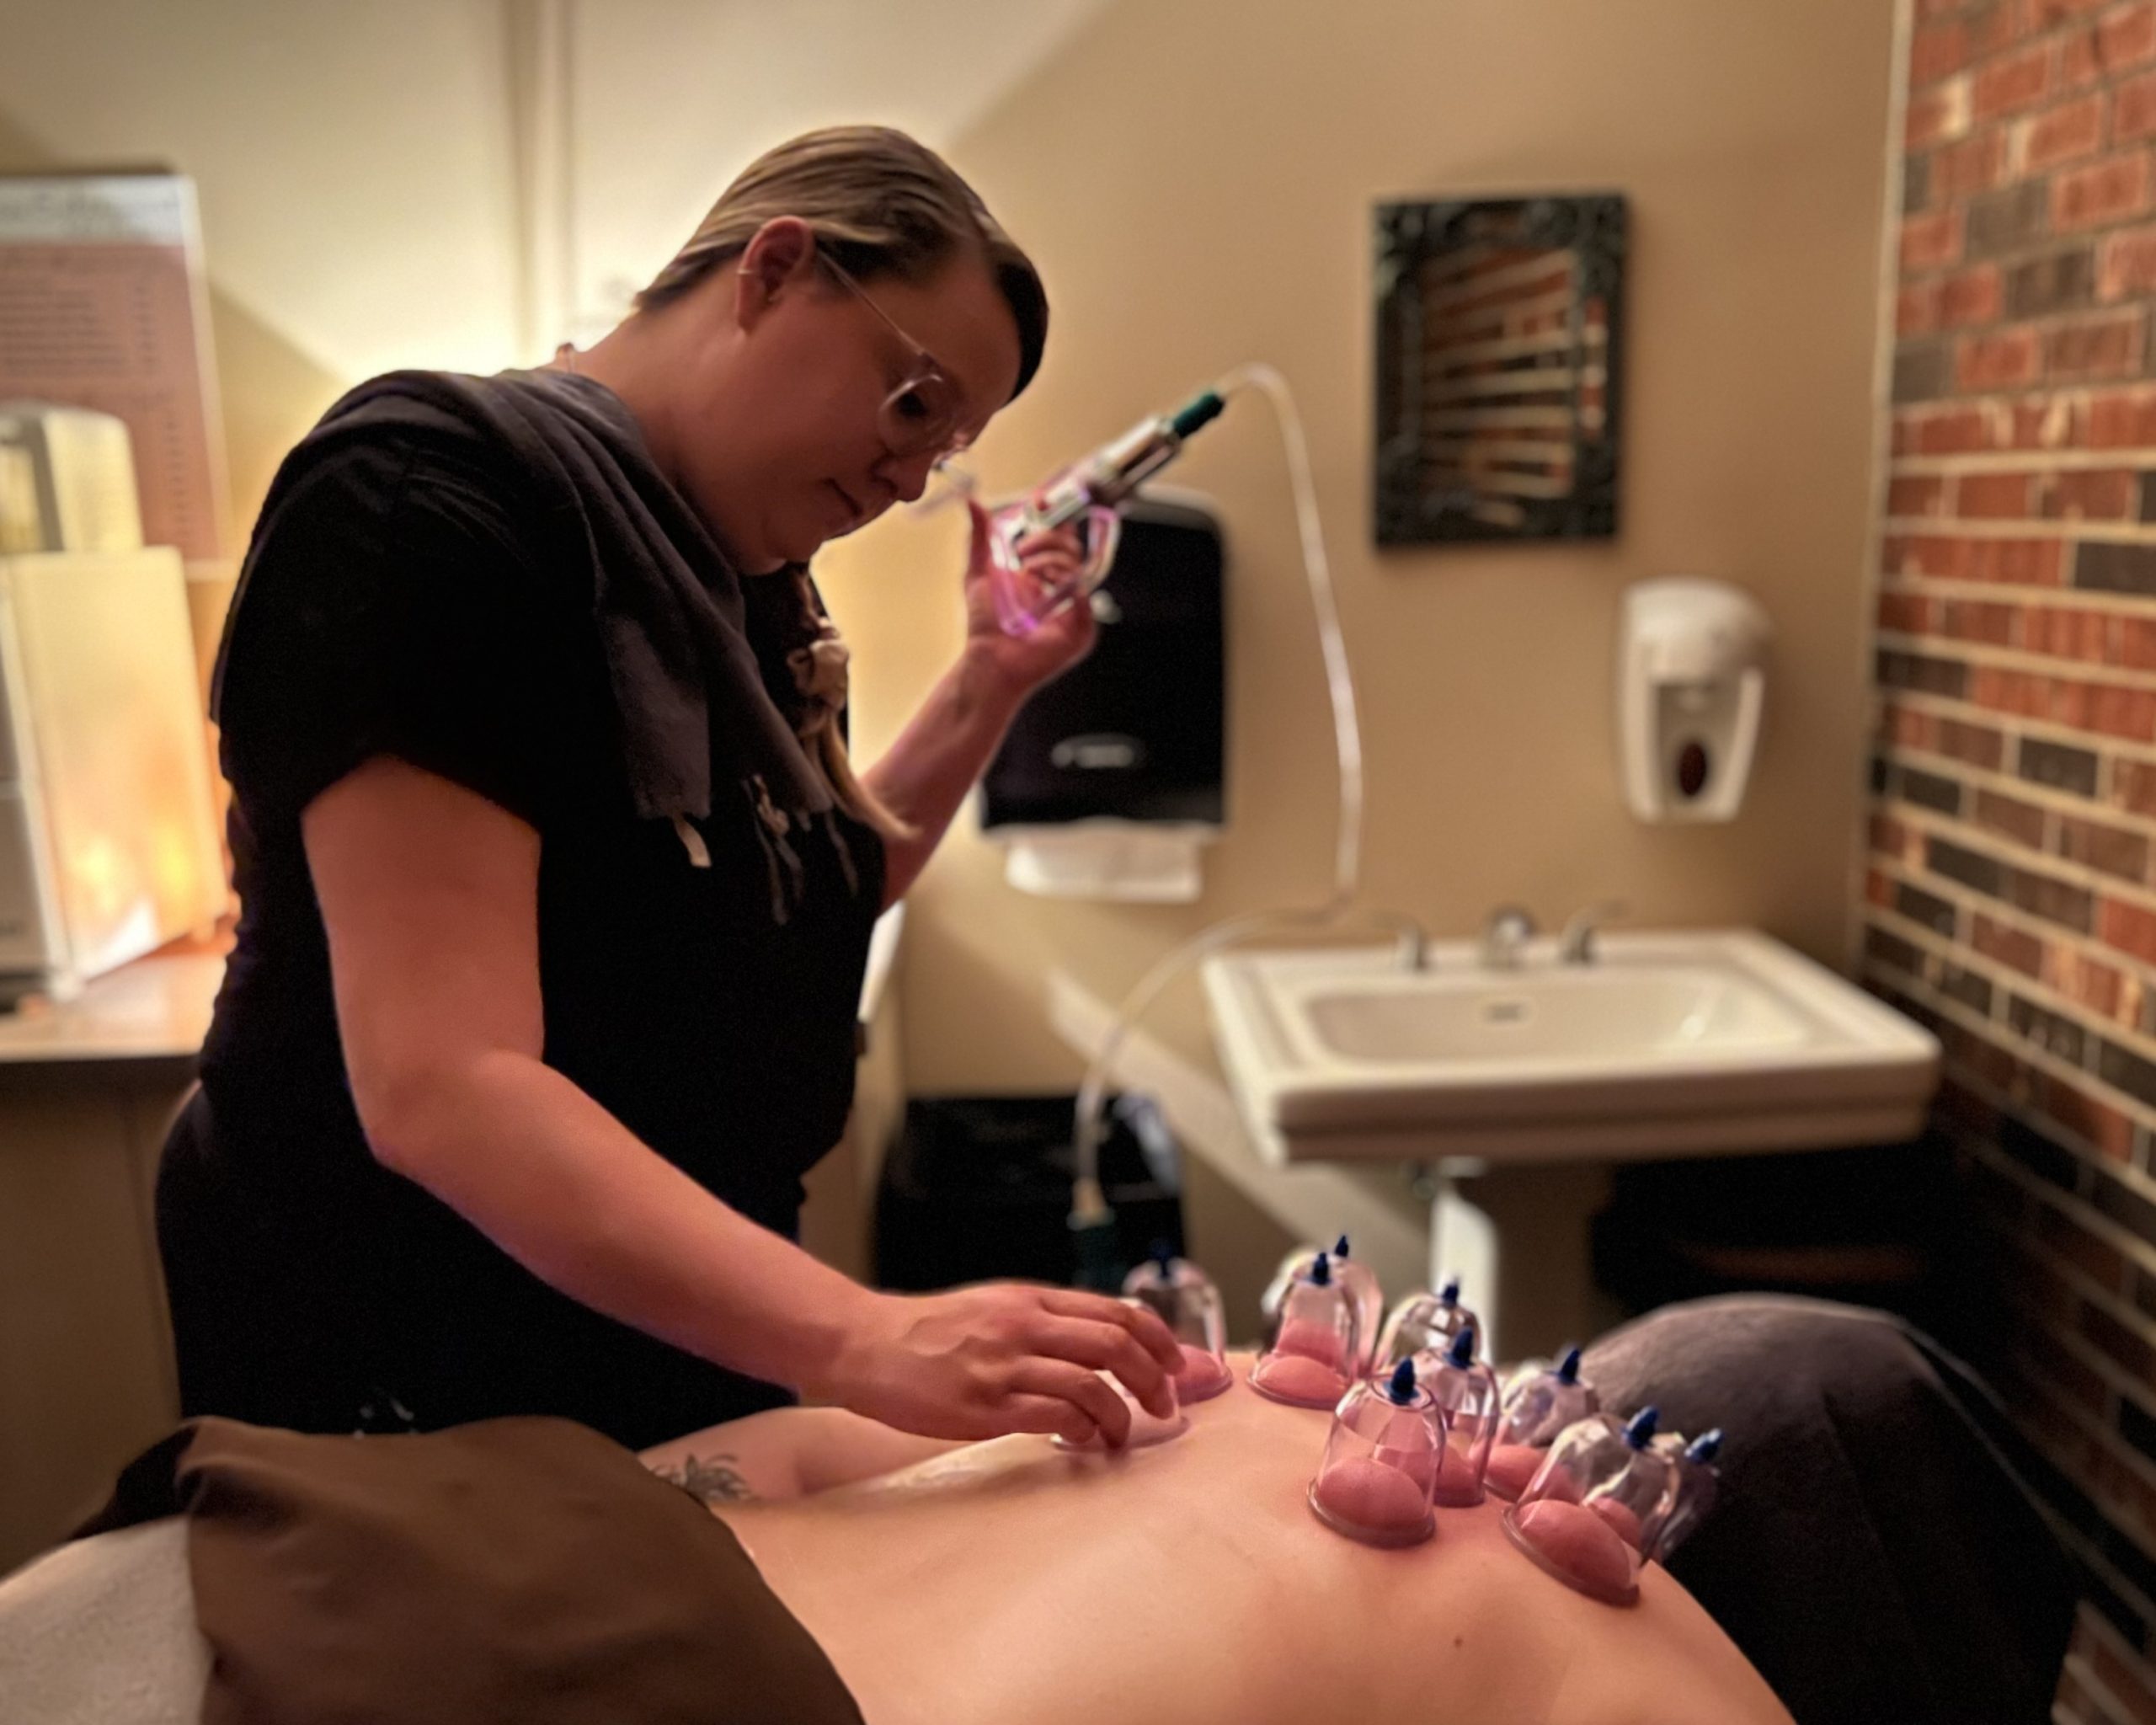 Our Tyler Mason massage therapist Sara relieves her guests' pain, inflammation, lymphedema, and more with cupping therapy.